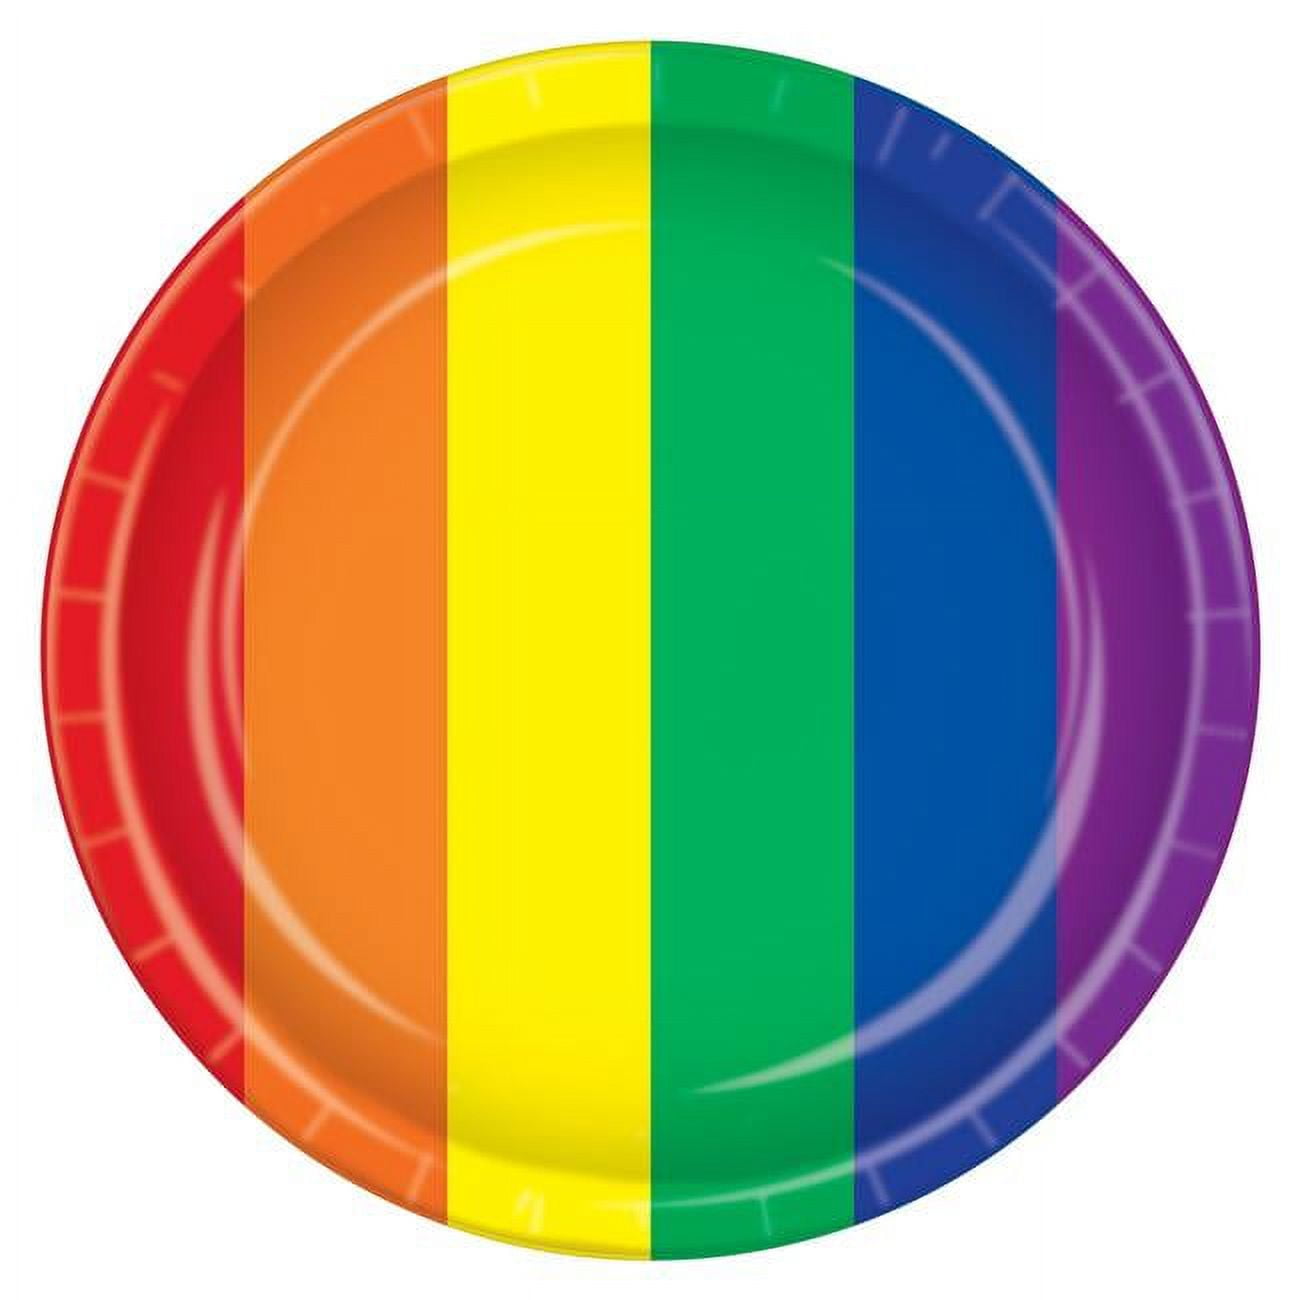 Picture of Beistle 53811 Rainbow Plates, Multi Color - Pack of 12